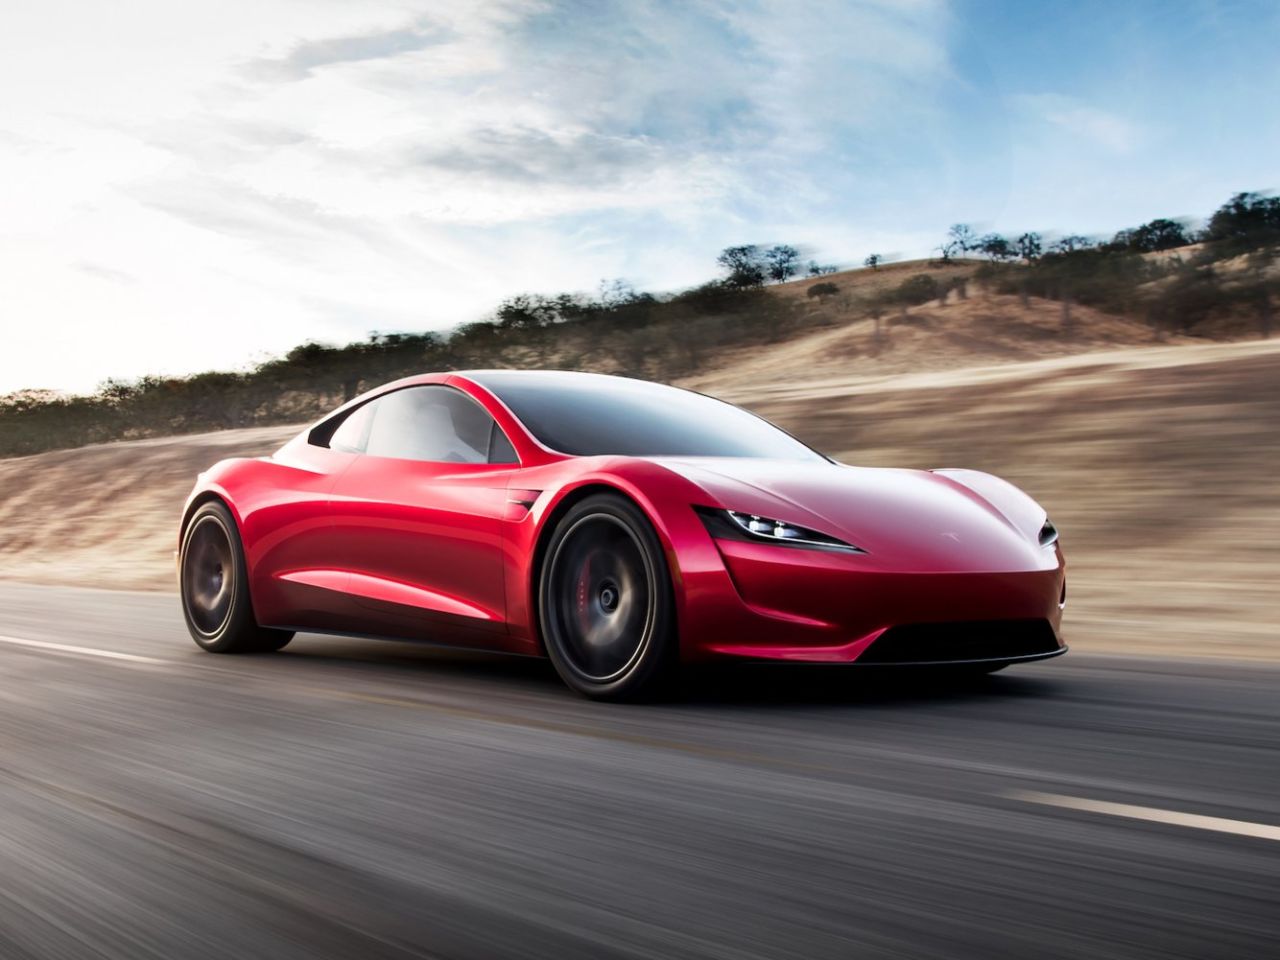 Tesla expect its electric supercar, the Roadster, to be ready as early as next year and claim in will be able to complete 620 miles per charge, while boasting a top speed of 250mph.